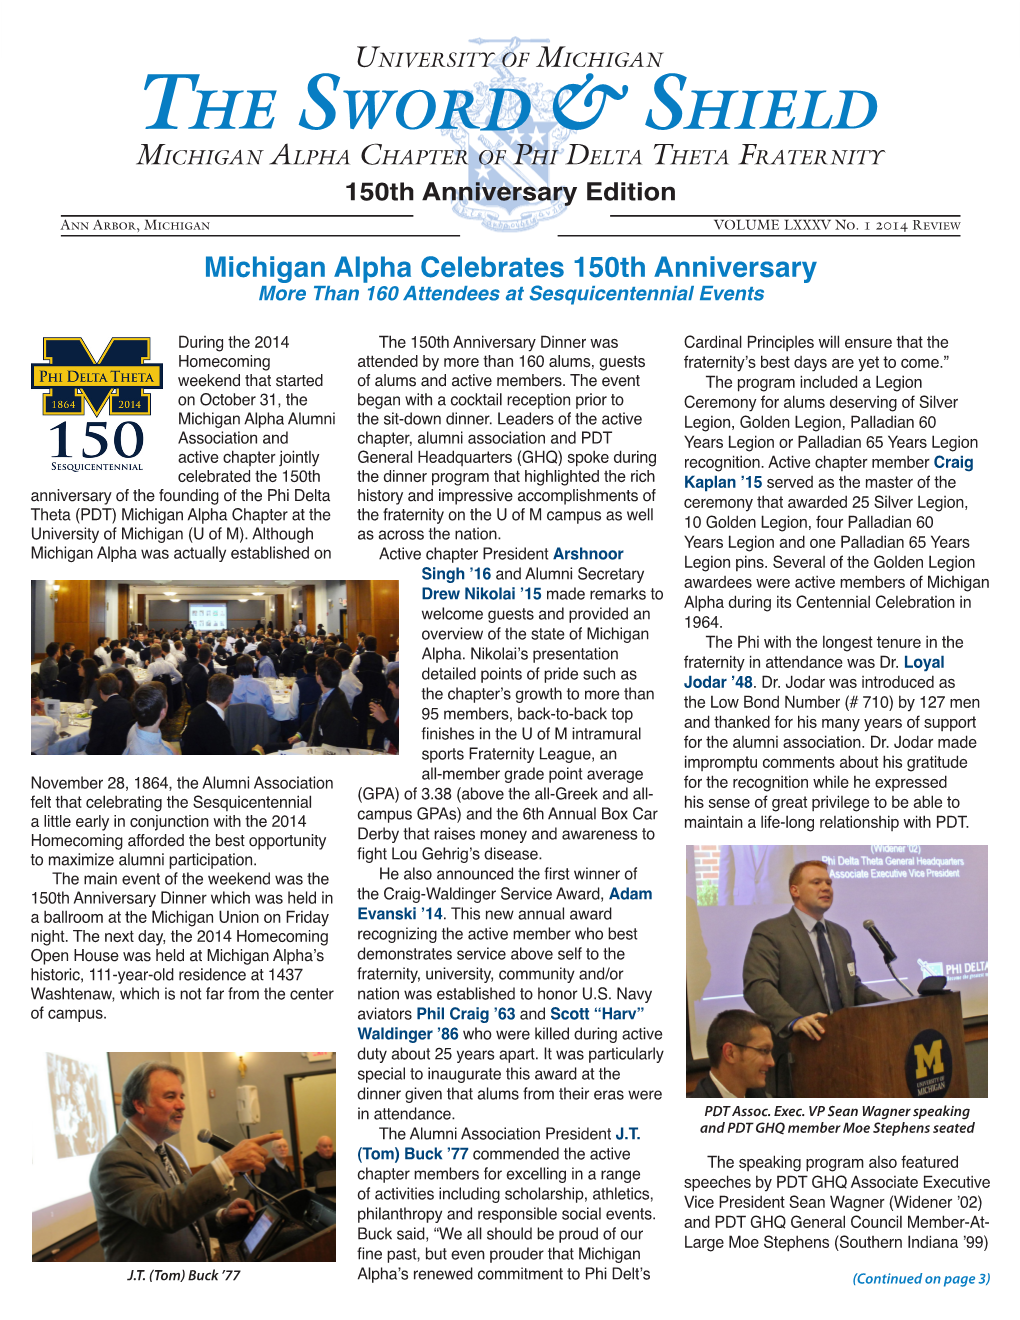 Michigan Alpha Celebrates 150Th Anniversary More Than 160 Attendees at Sesquicentennial Events